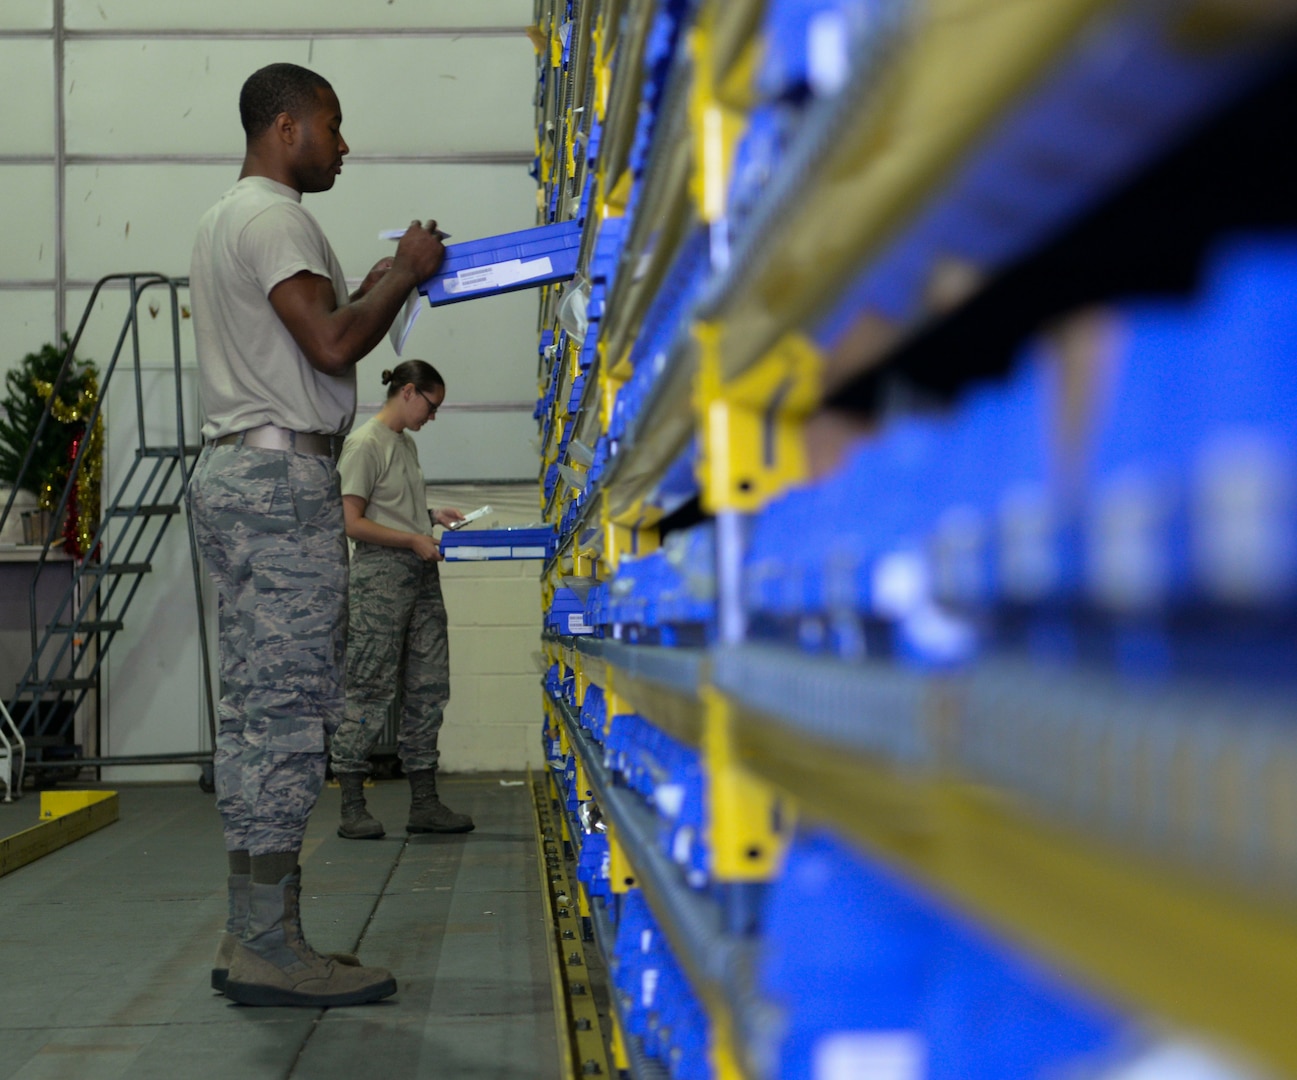 U.S Air Force Airman 1st Class Jimmy Ogletree, 100th Logistics Readiness Squadron aircraft parts store journeyman, front, and Staff Sgt. Morgan Petter, 100th LRS APS supervisor find aircraft parts for an order request at RAF Mildenhall, England, Aug. 8, 2018. The APS supplies the aircraft with mobility readiness spare part kits. Each package is tailored to support an aircraft for the first 30 days of a deployment. (U.S. Air Force photo by Airman 1st Class Alexandria Lee)